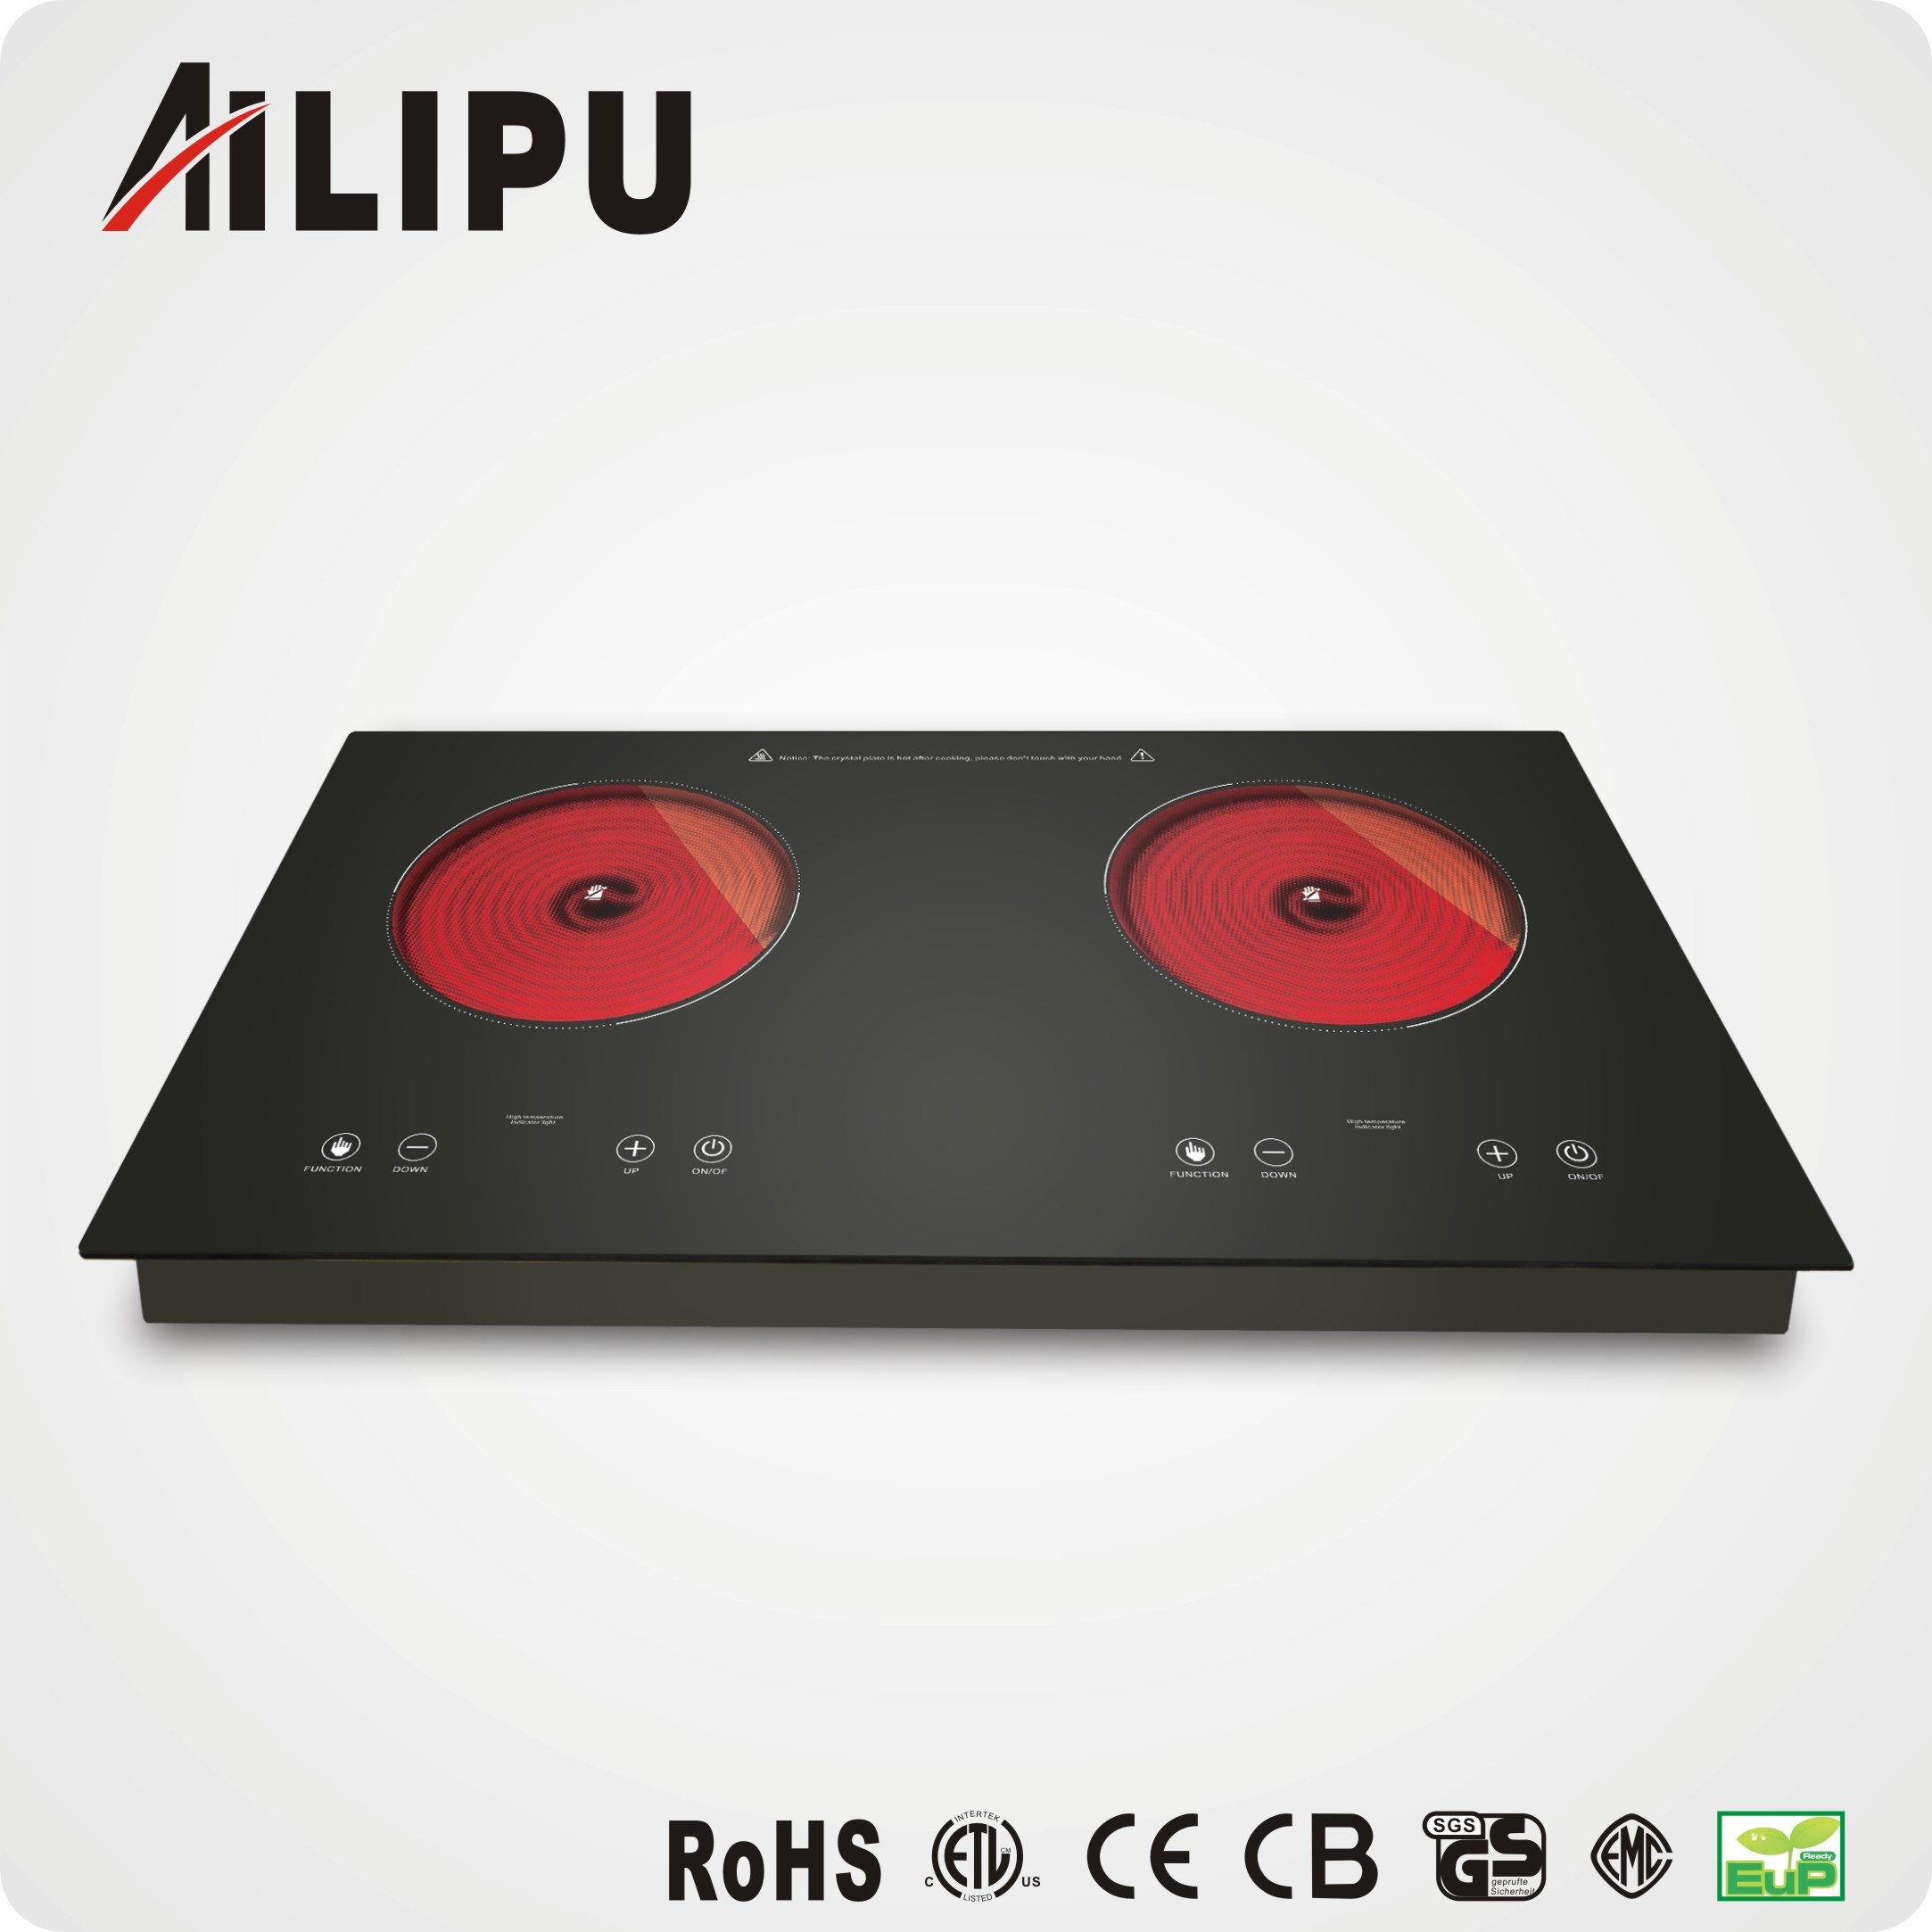 2016 New Design Appliance Double Electric Hotplate/Ceramic Cookers/Infrared Cooker